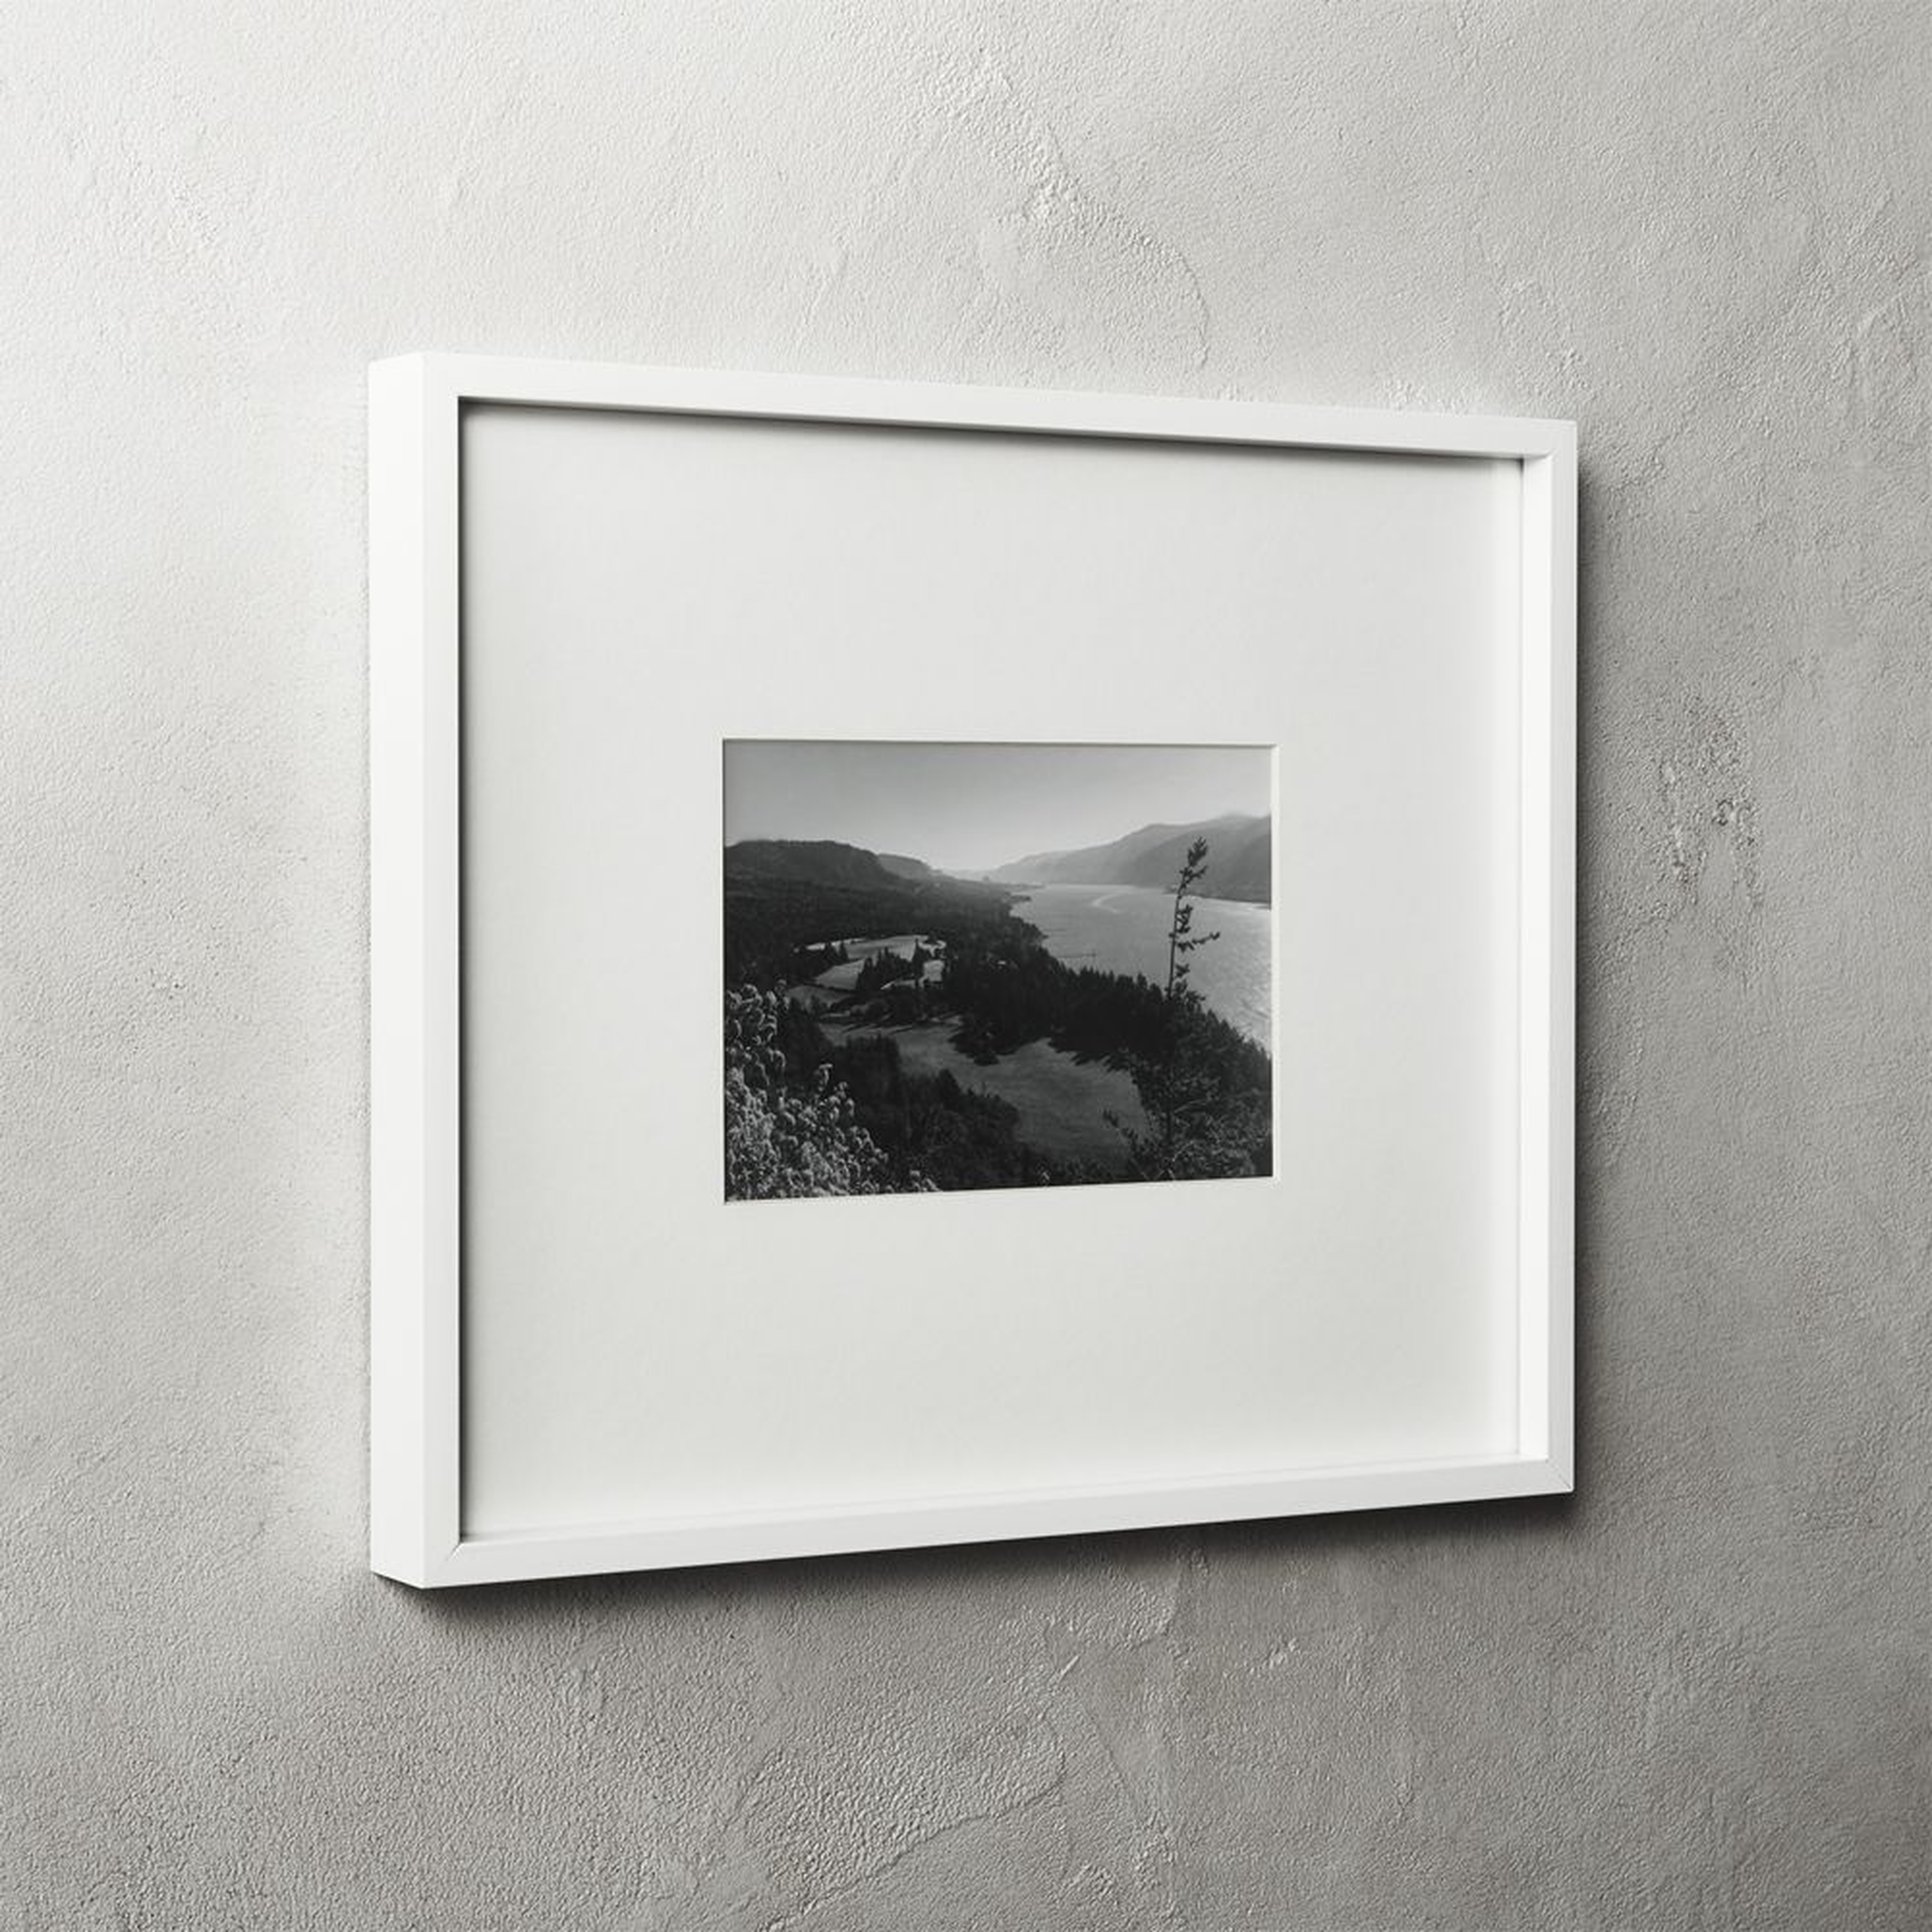 5 x7" Gallery White Frame with White Mat - CB2